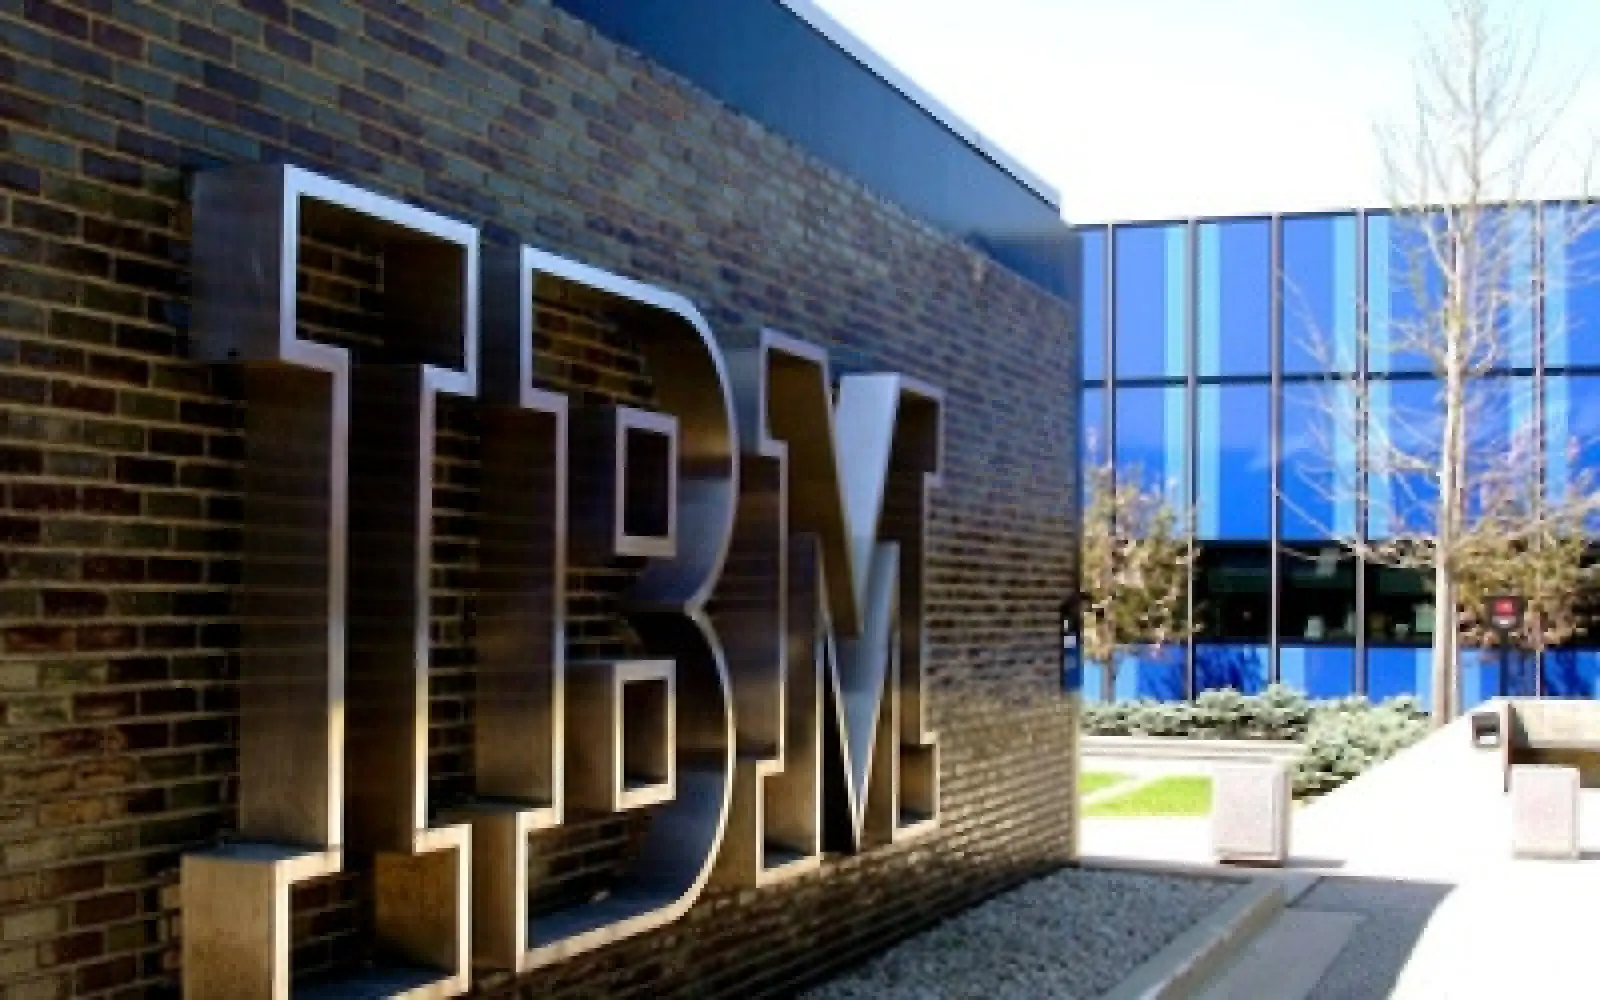 Buy a house near the office or leave the company! IBM issued new order in the name of company managers